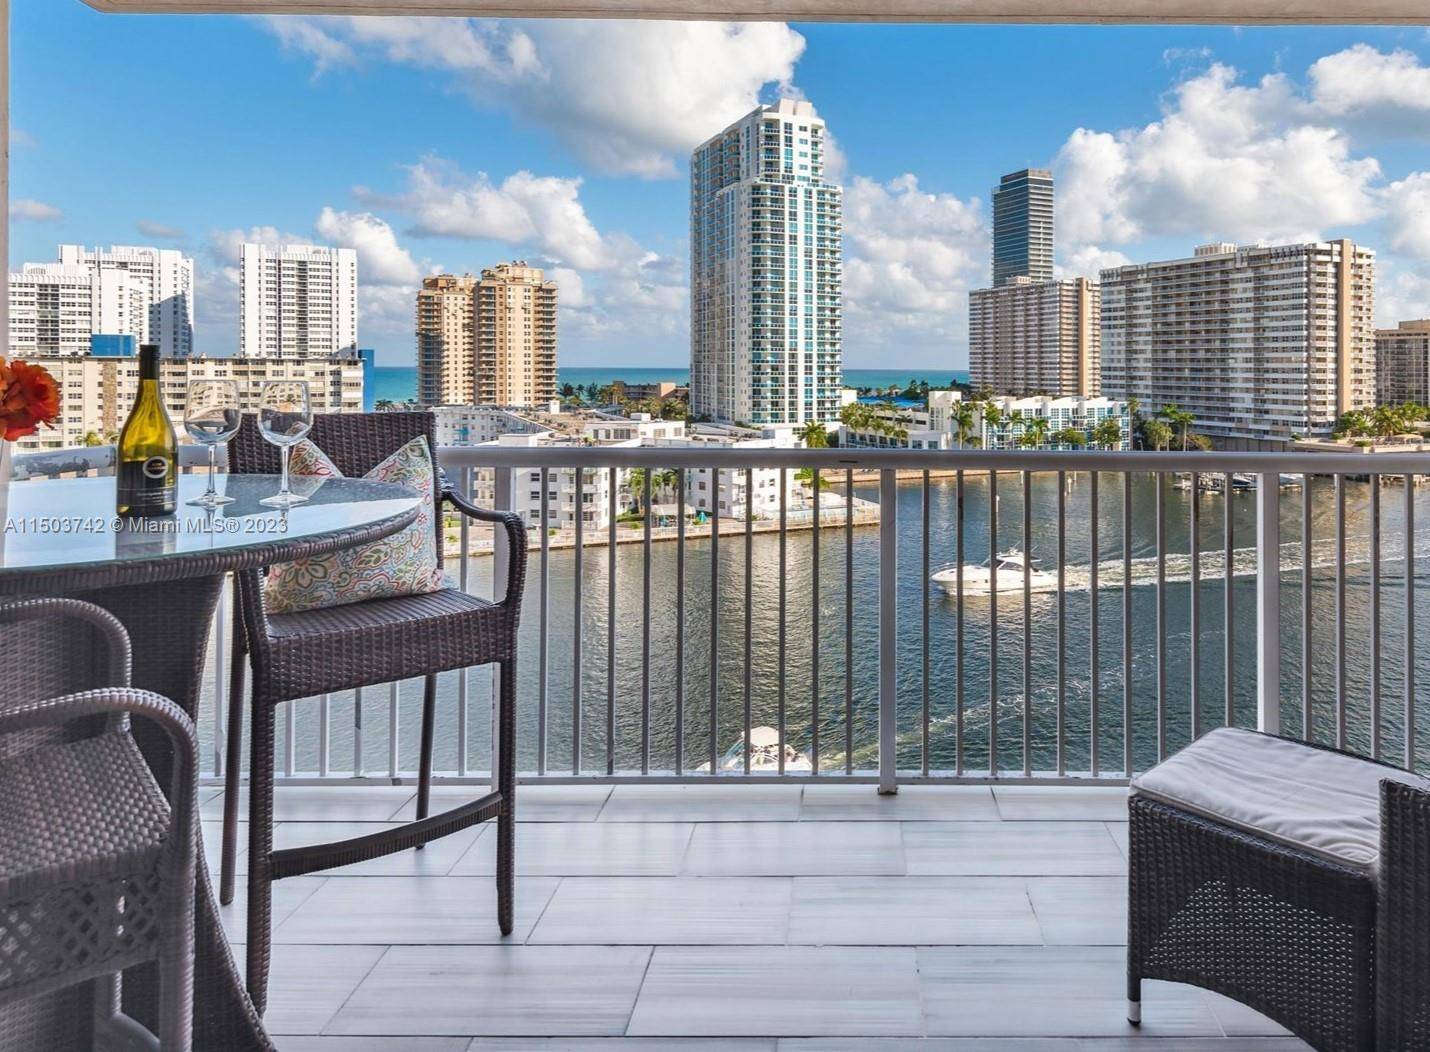 PRICED TO SELL QUICKLY. Rarely available, a continuous intracoastal boat parade from this gorgeous corner unit, Waterview from almost everywhere in this unit !